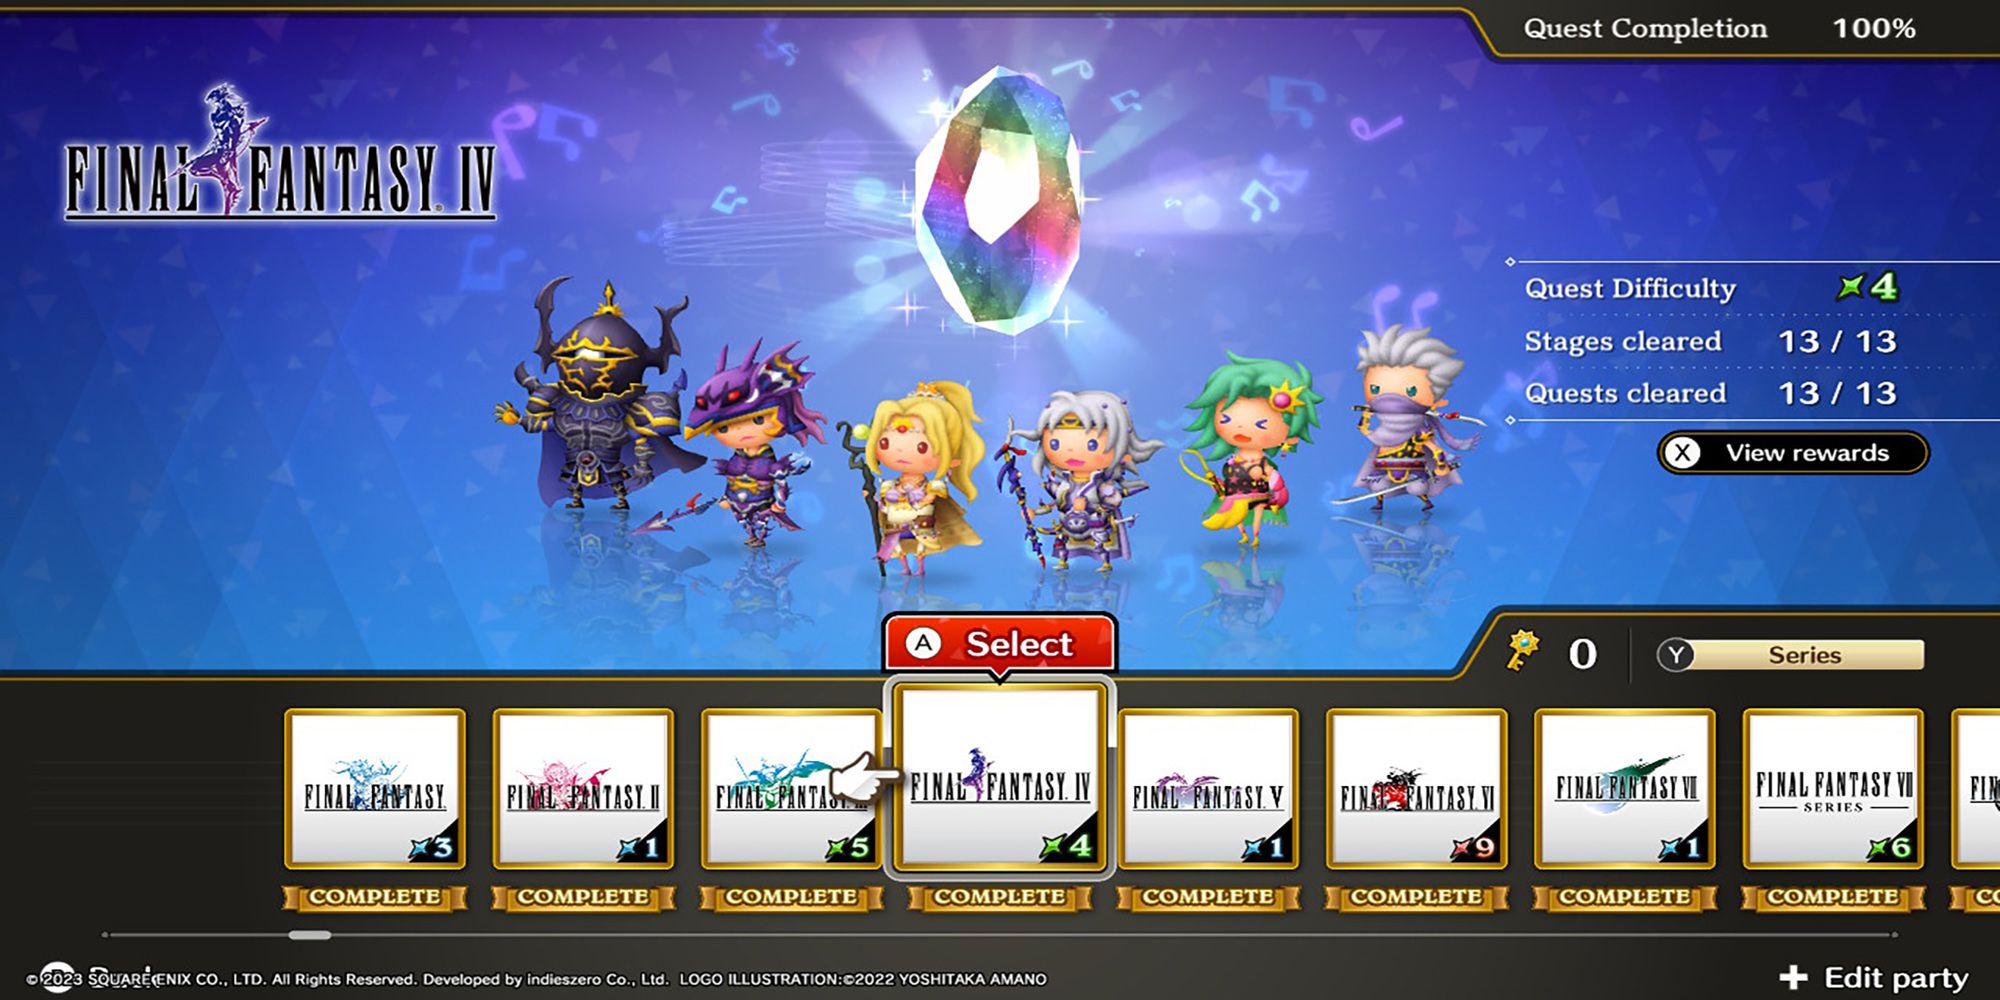 Golbez, Kain, Rosa, Cecil, Rydia, and Edge stand below a glowing Rhythmia crystal in Theatrhythm: Final Bar Line's Series Title Select Screen.